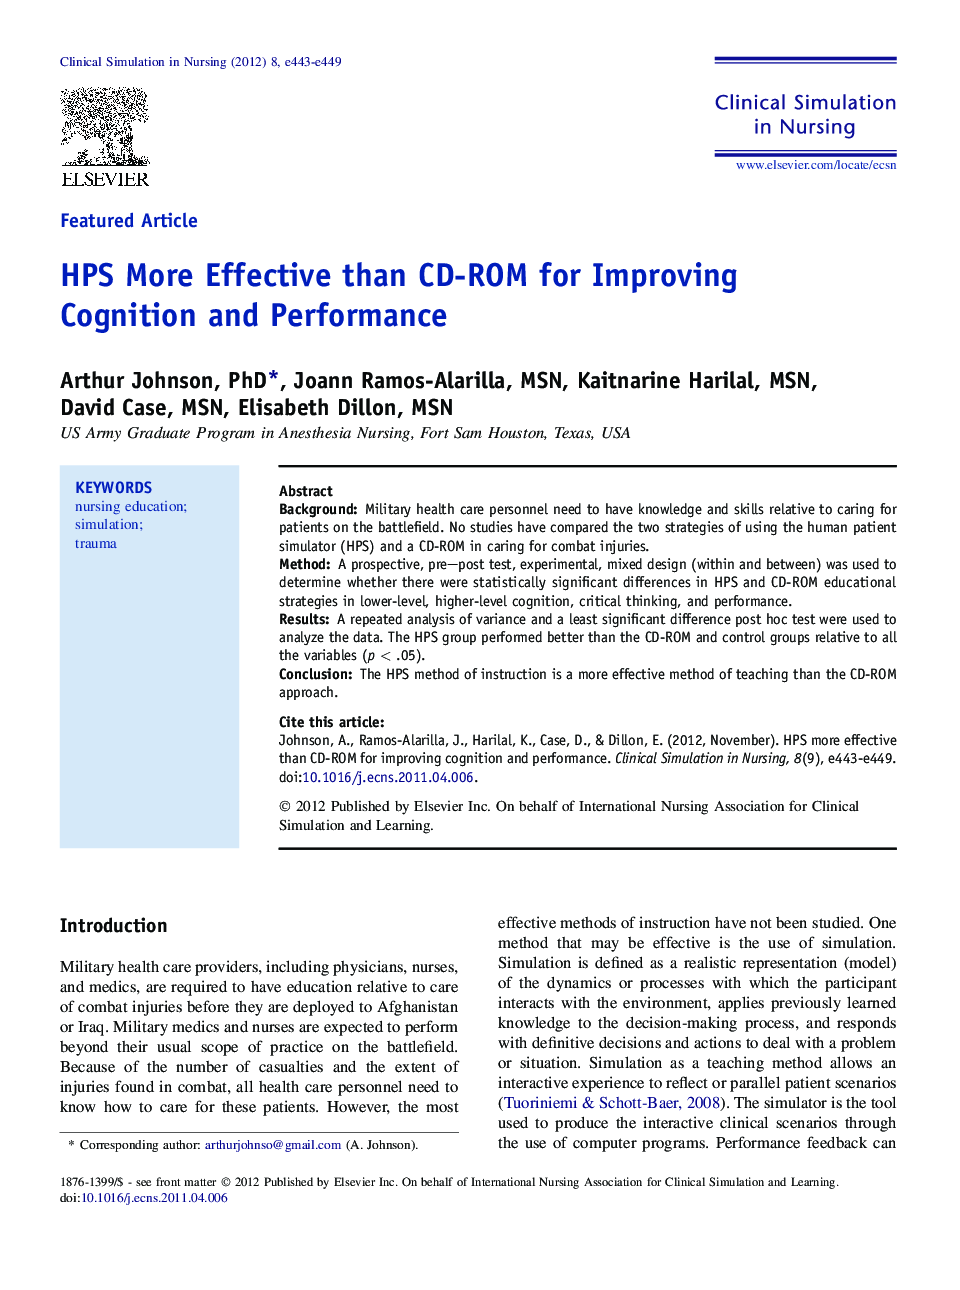 HPS More Effective than CD-ROM for Improving Cognition and Performance